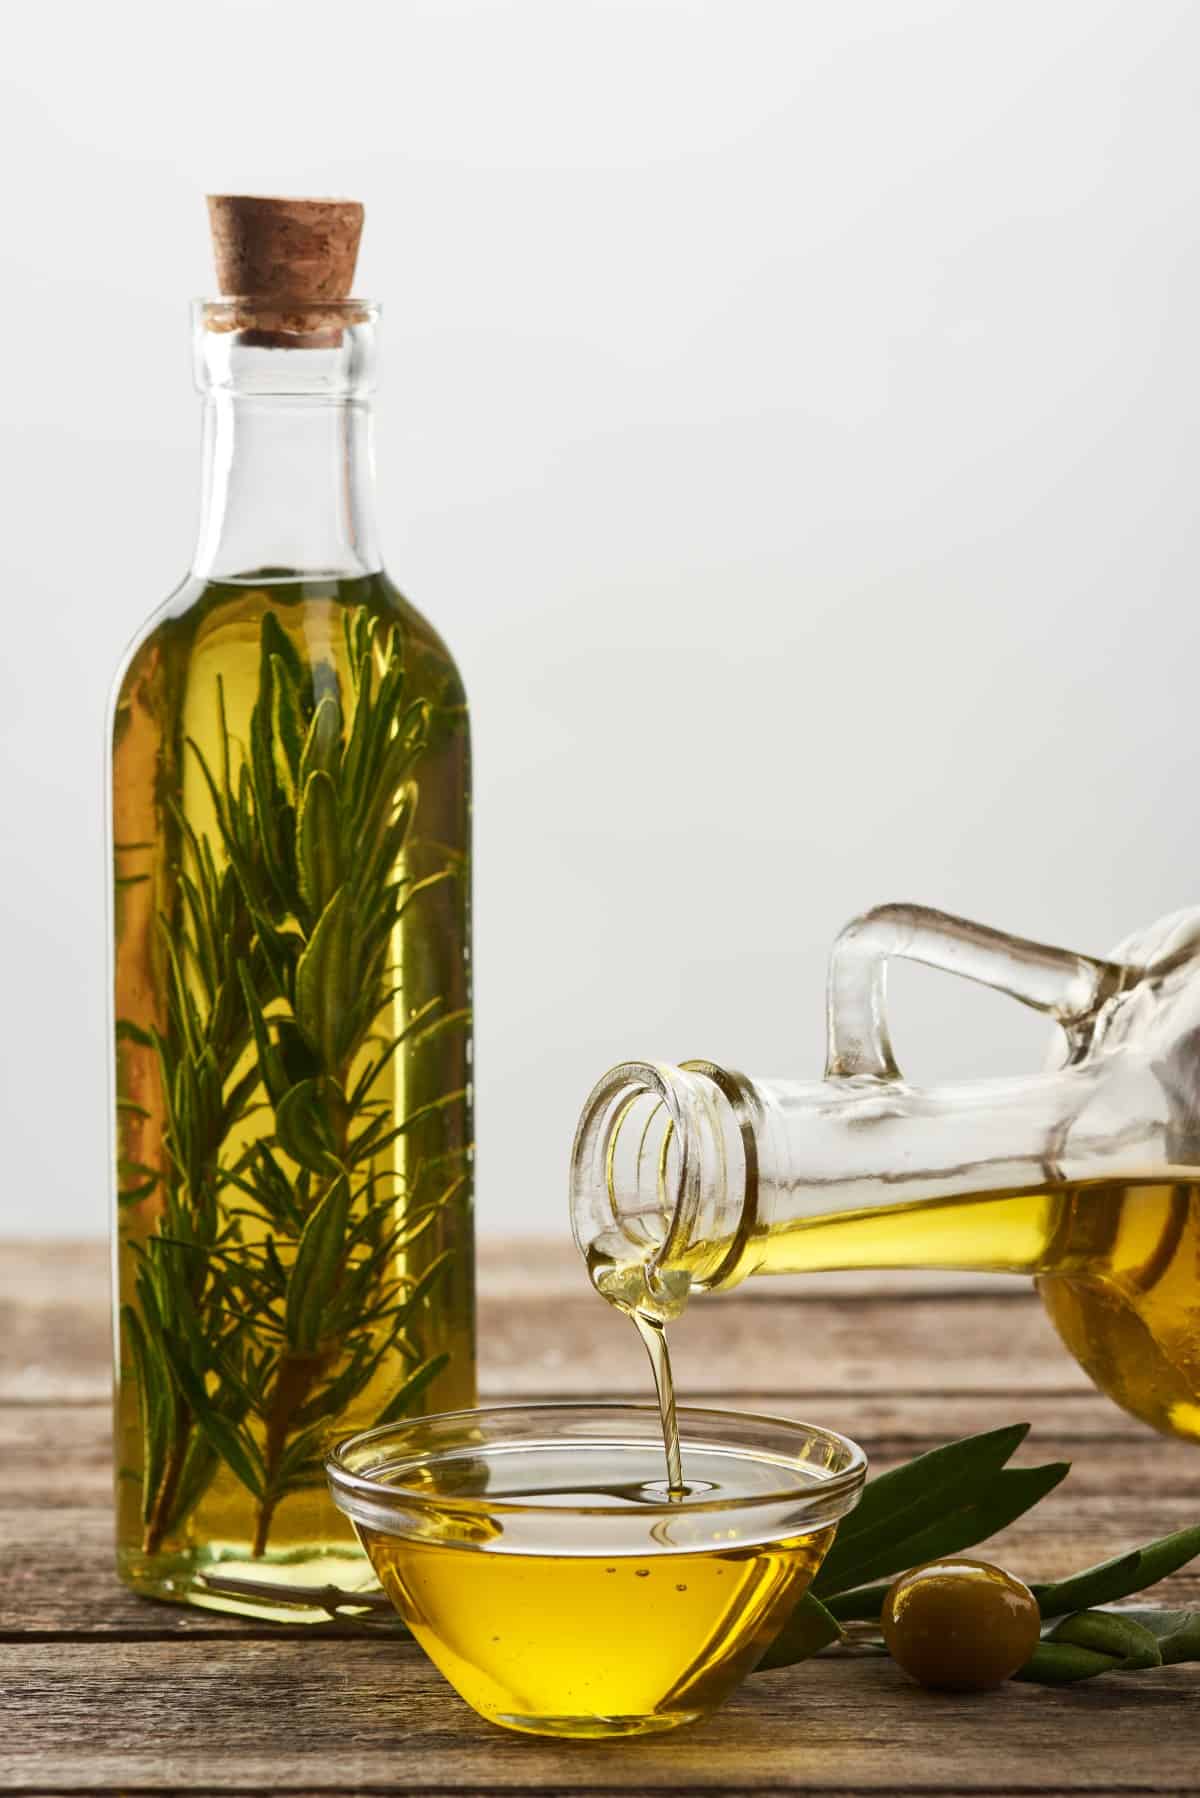 Pouring olive oil from bottle into glass bowl.